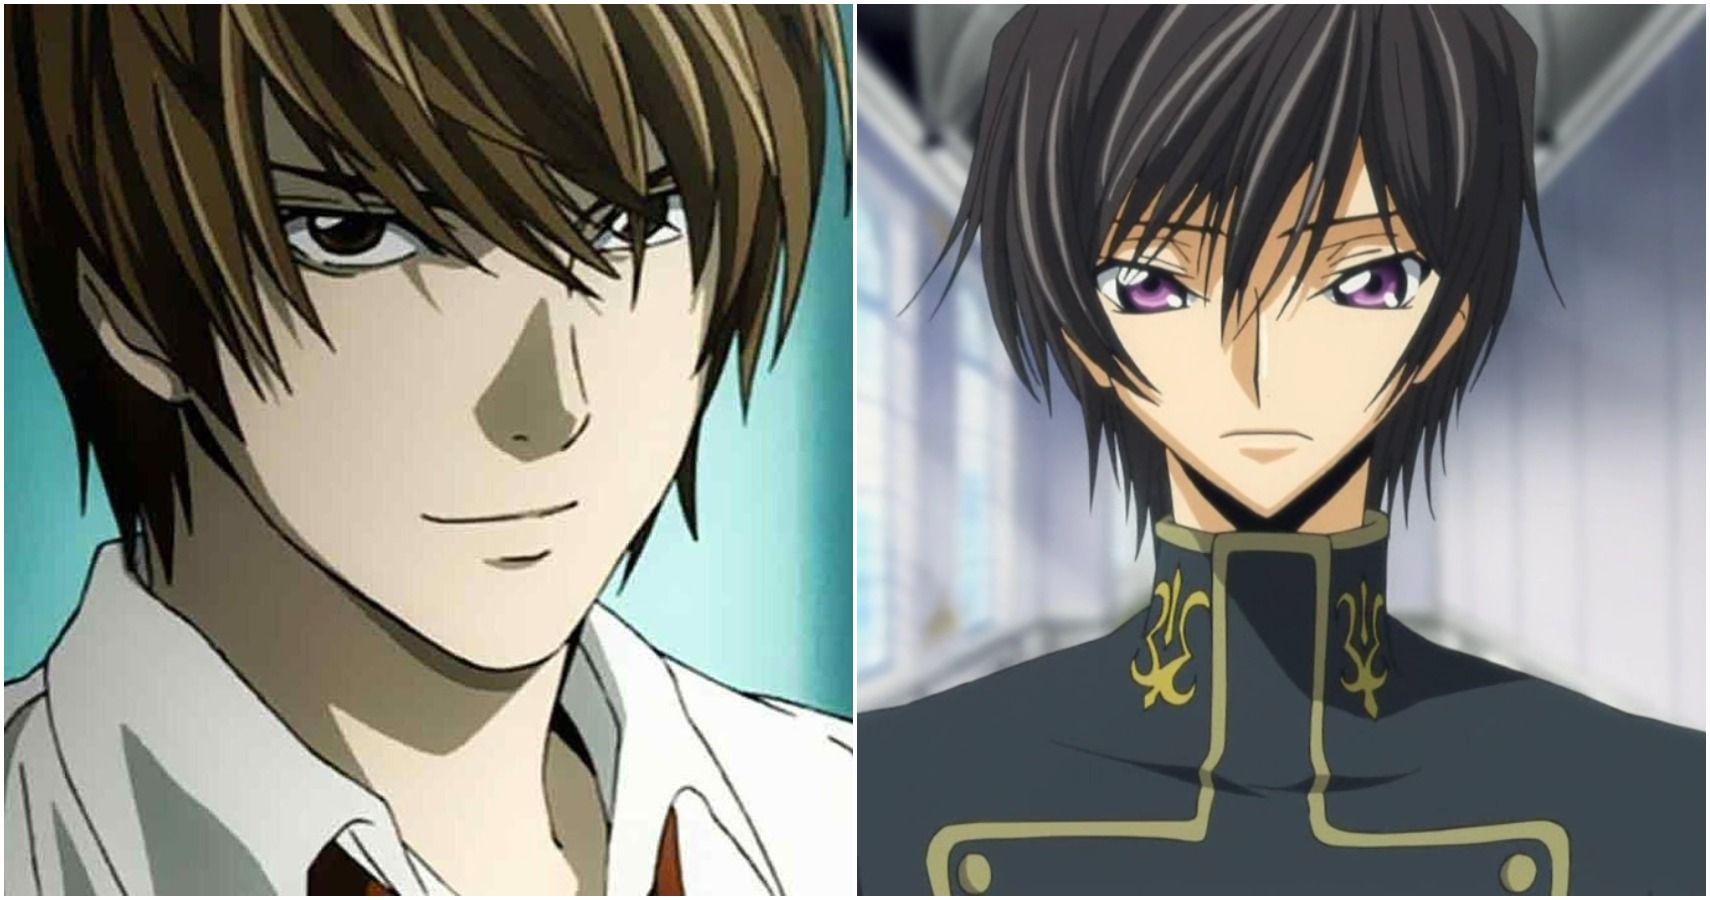 5 Plausible Fan Theories About Code Geass Lelouch Of The Re Surrection 5 Hilariously Bad Ones